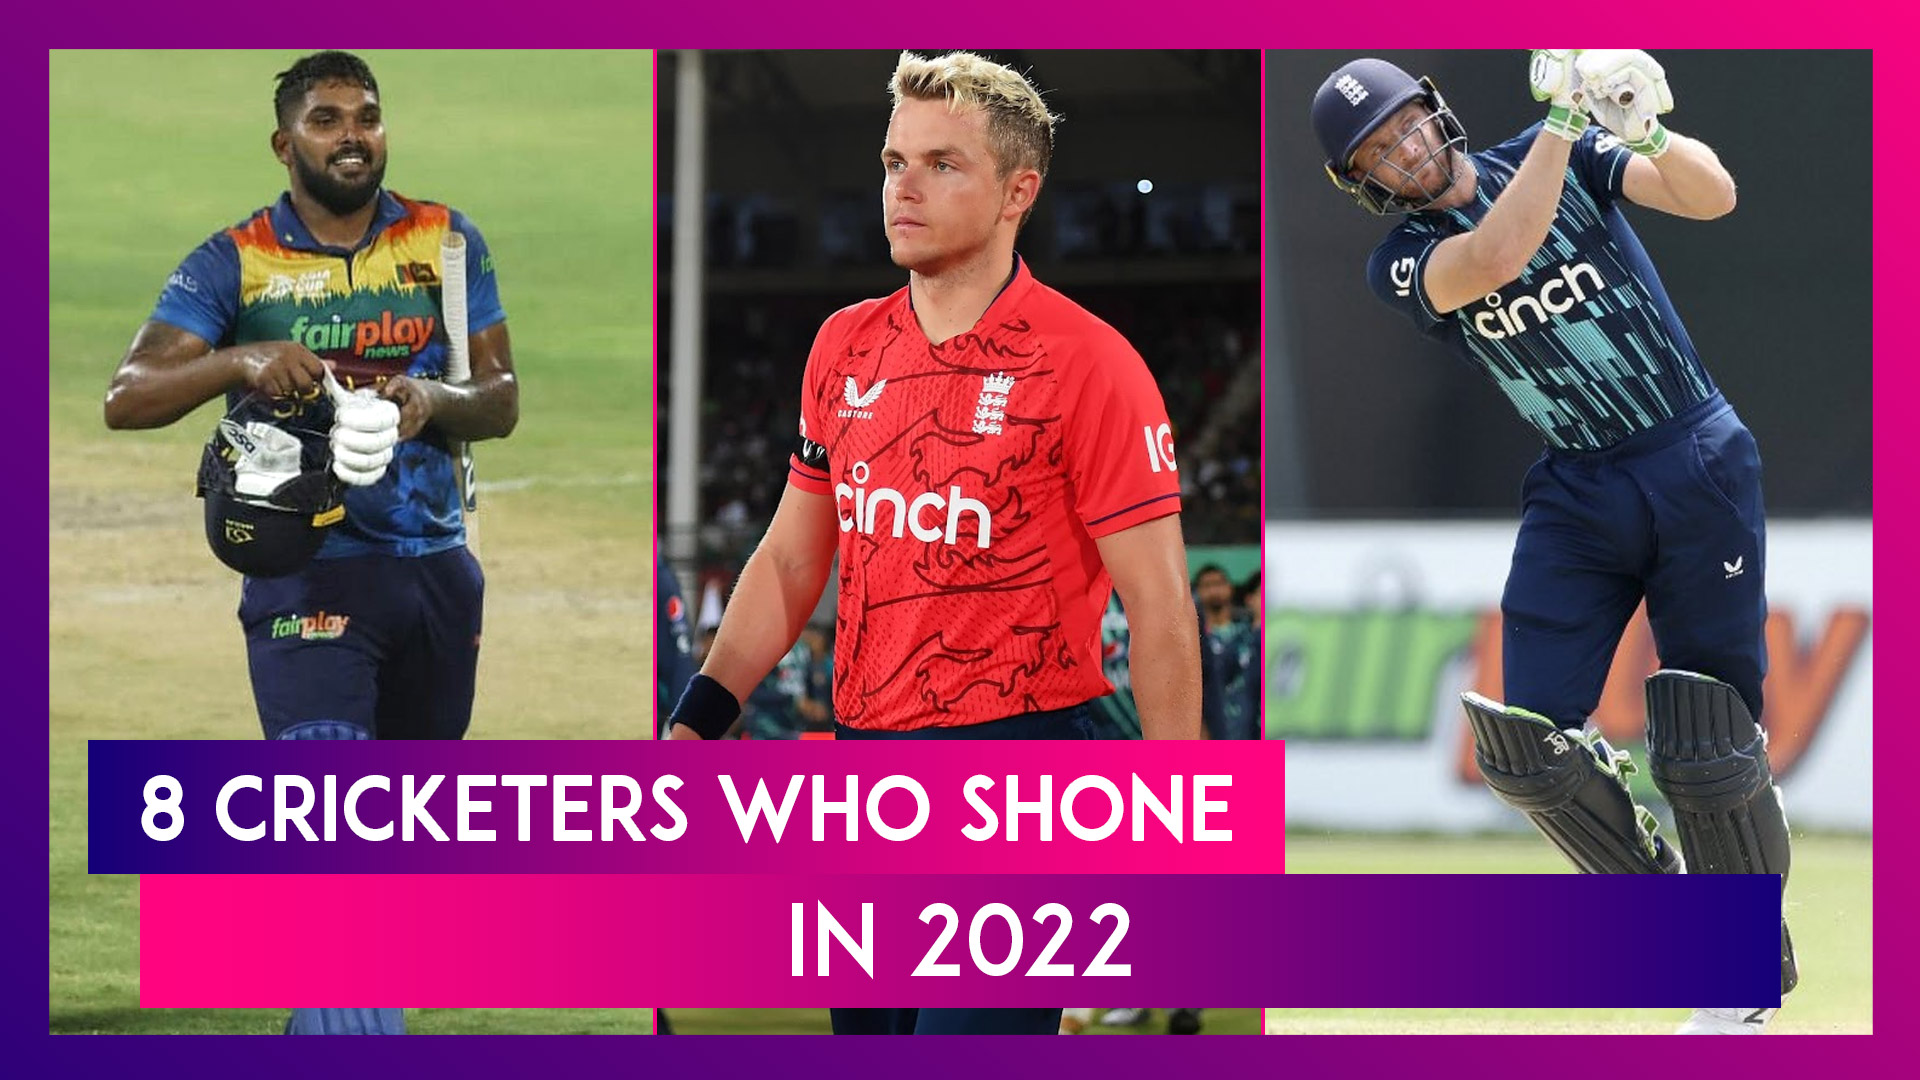 Year End 2022 Special: From Hardik Pandya to Jos Buttler, 8 Cricketers Who  Owned The Year | 📹 Watch Videos From LatestLY